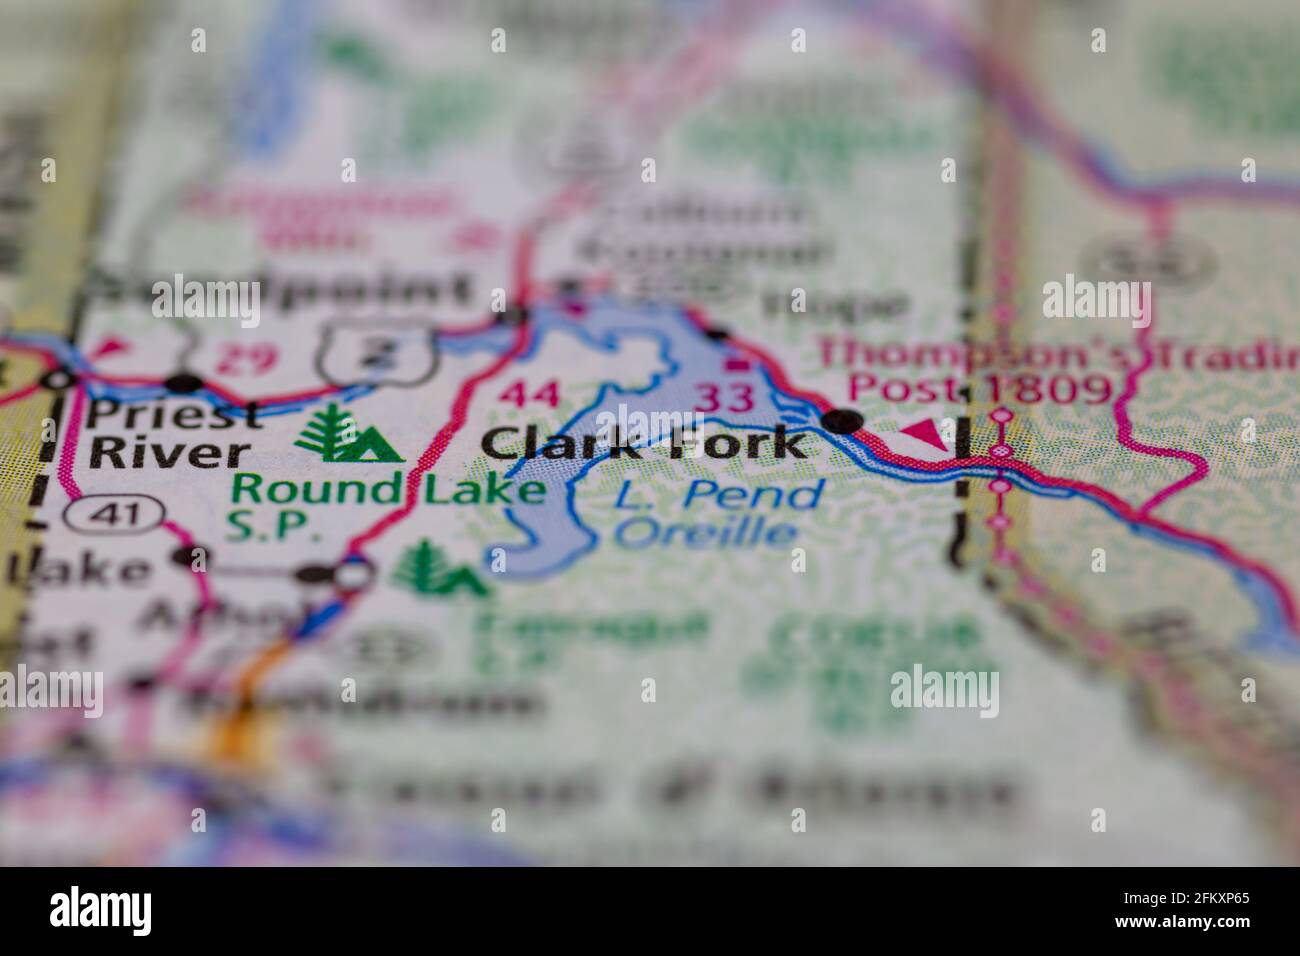 Clark Fork Idaho USA shown on a Geography map or road map Stock Photo